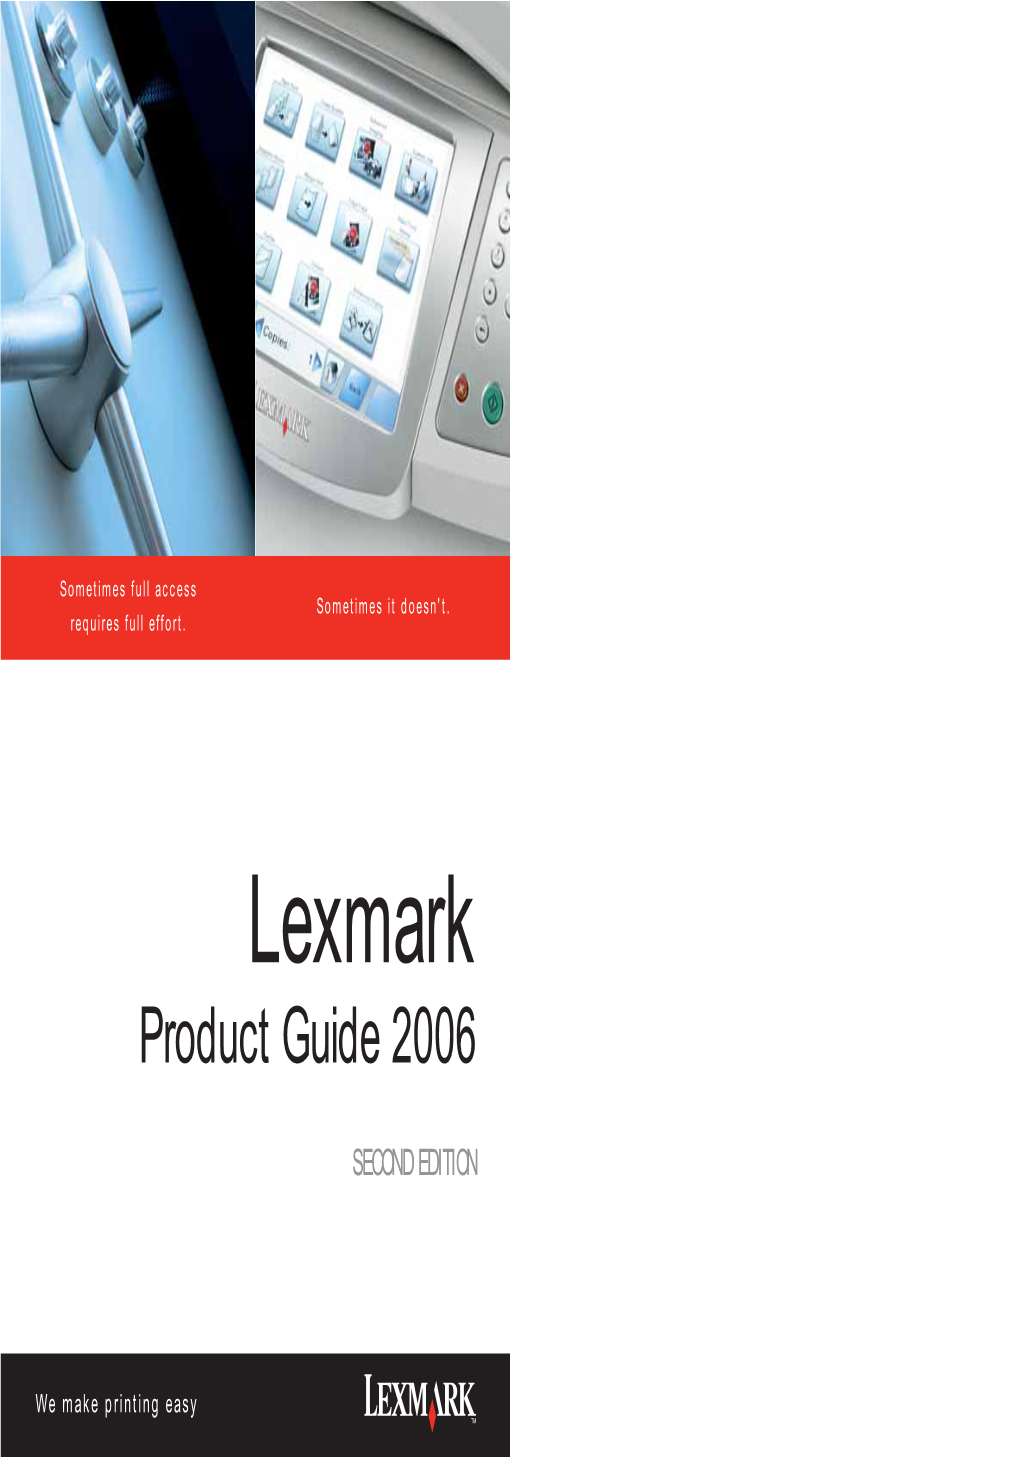 Lexmark Product Guide 2006